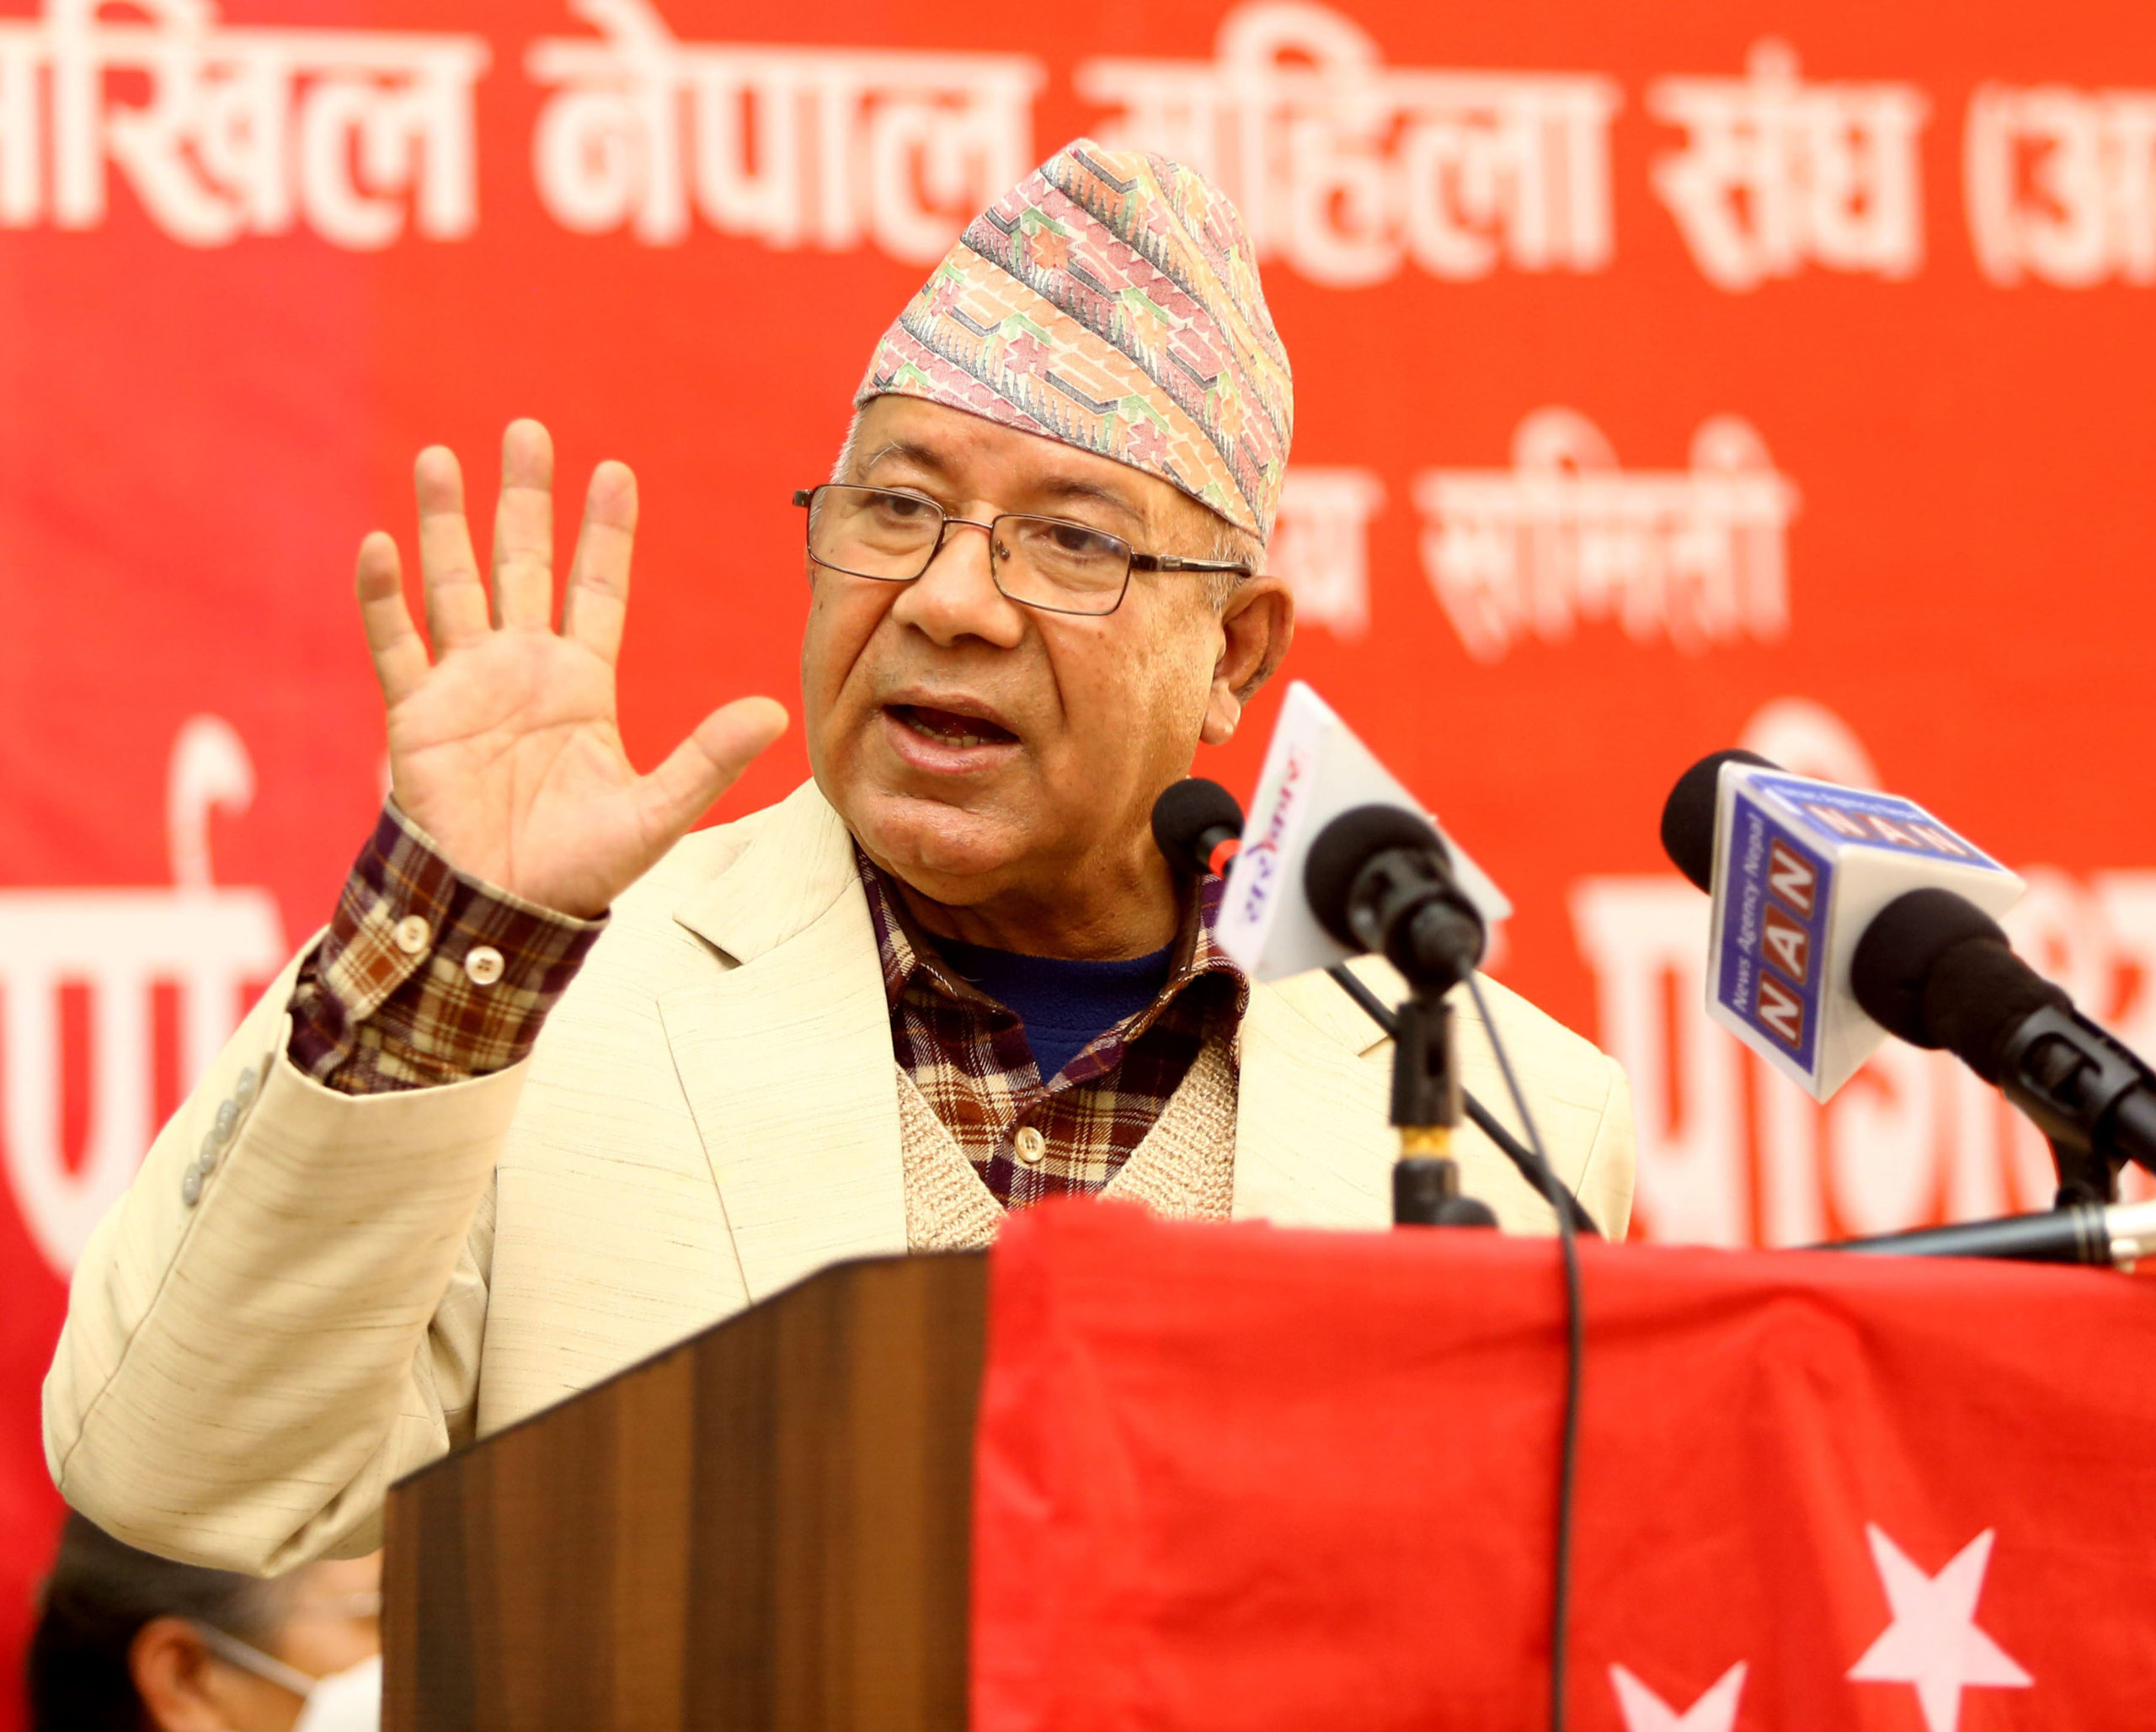 NCP leader Nepal calls SC decision “historic and courageous”